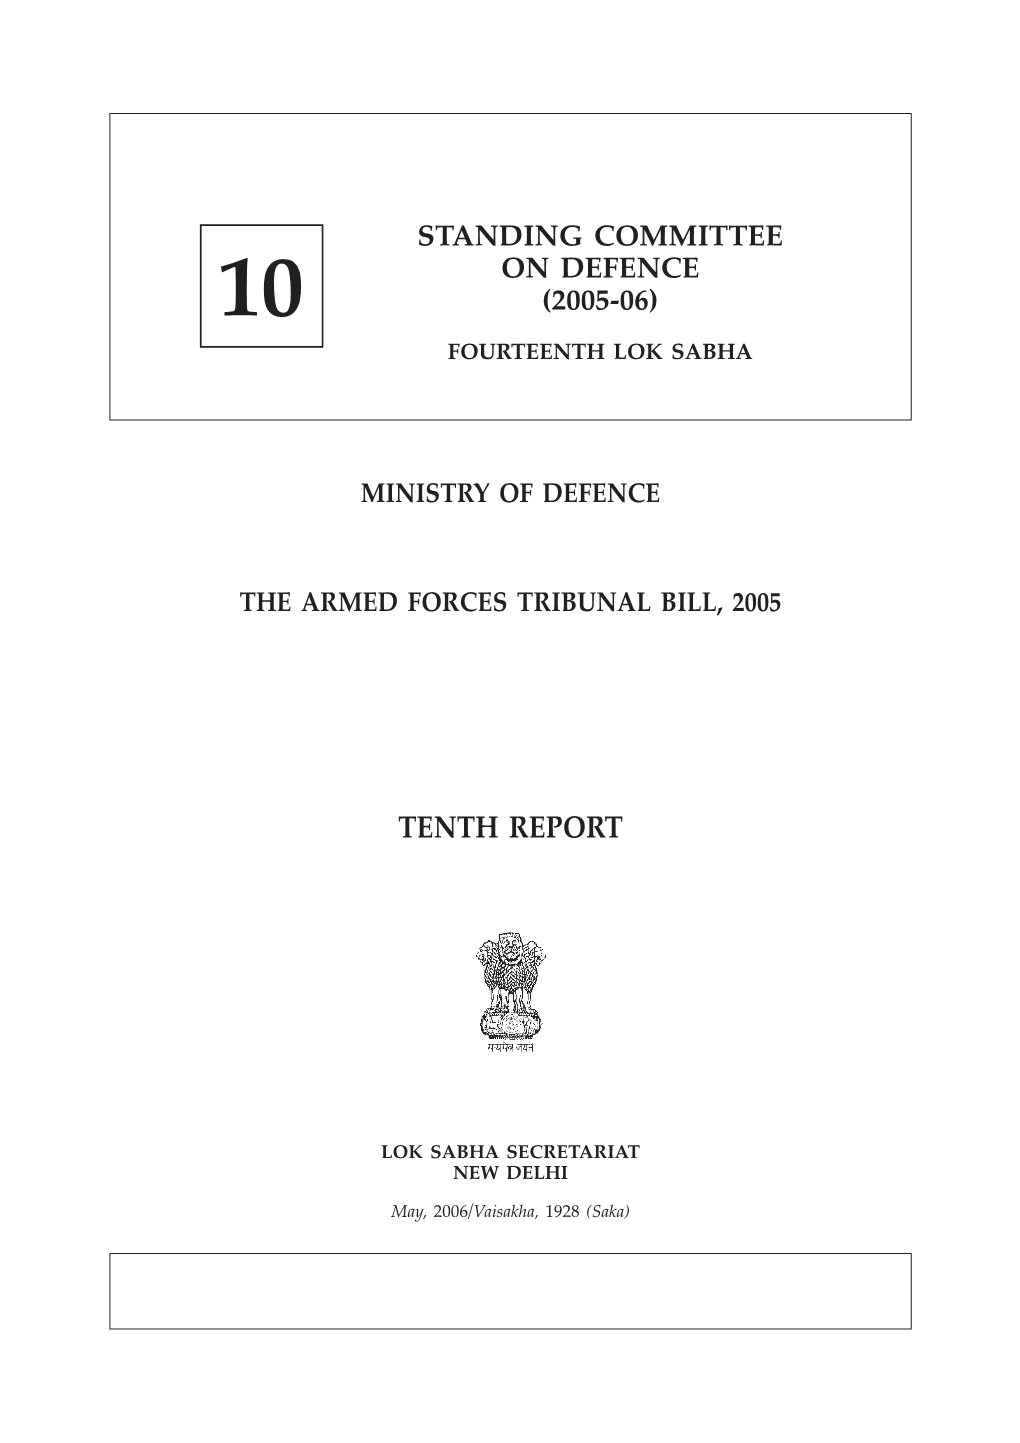 Ministry of Defence the Armed Forces Tribunal Bill, 2005